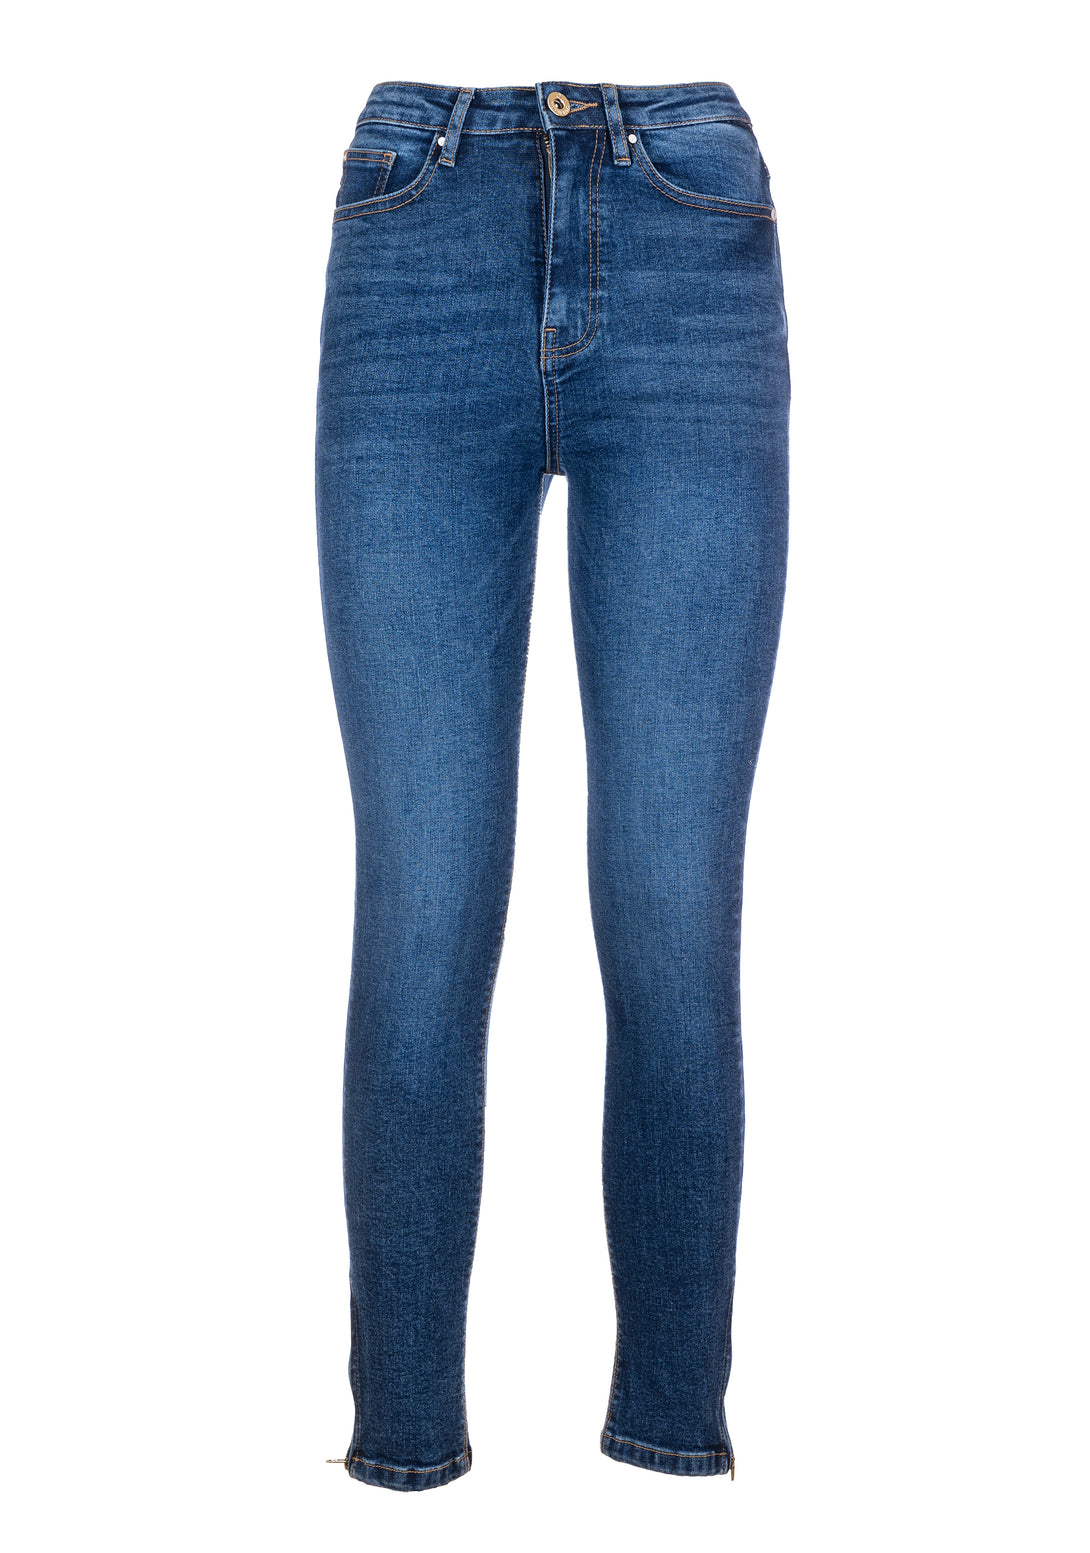 Jeans slim fit made in denim with middle wash Fracomina FP23WV1007D40102-B06-1